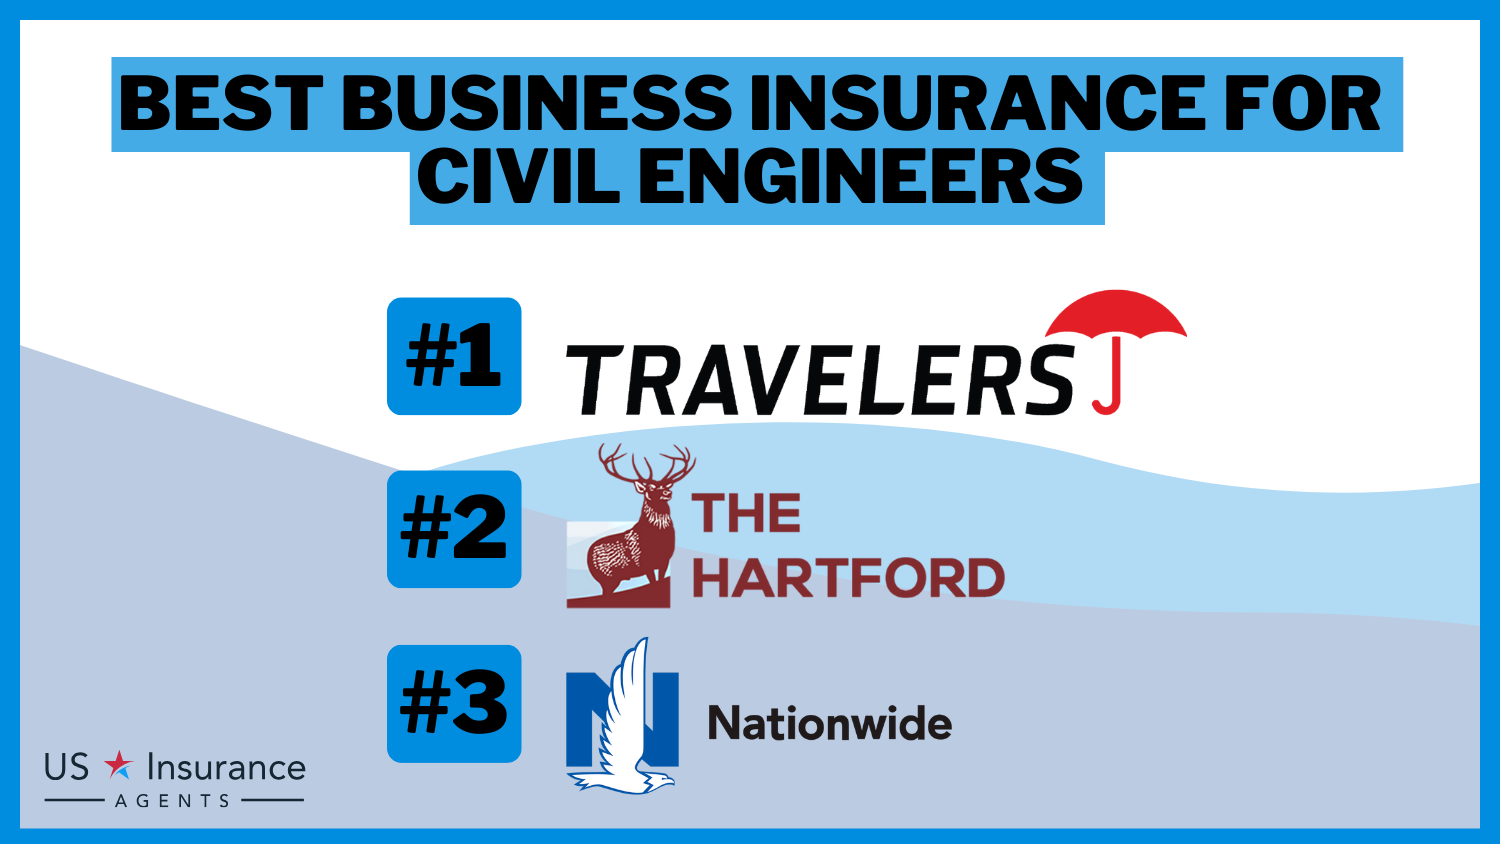 Travelers, The Hartford & Nationwide: Best Business Insurance for Civil Engineers